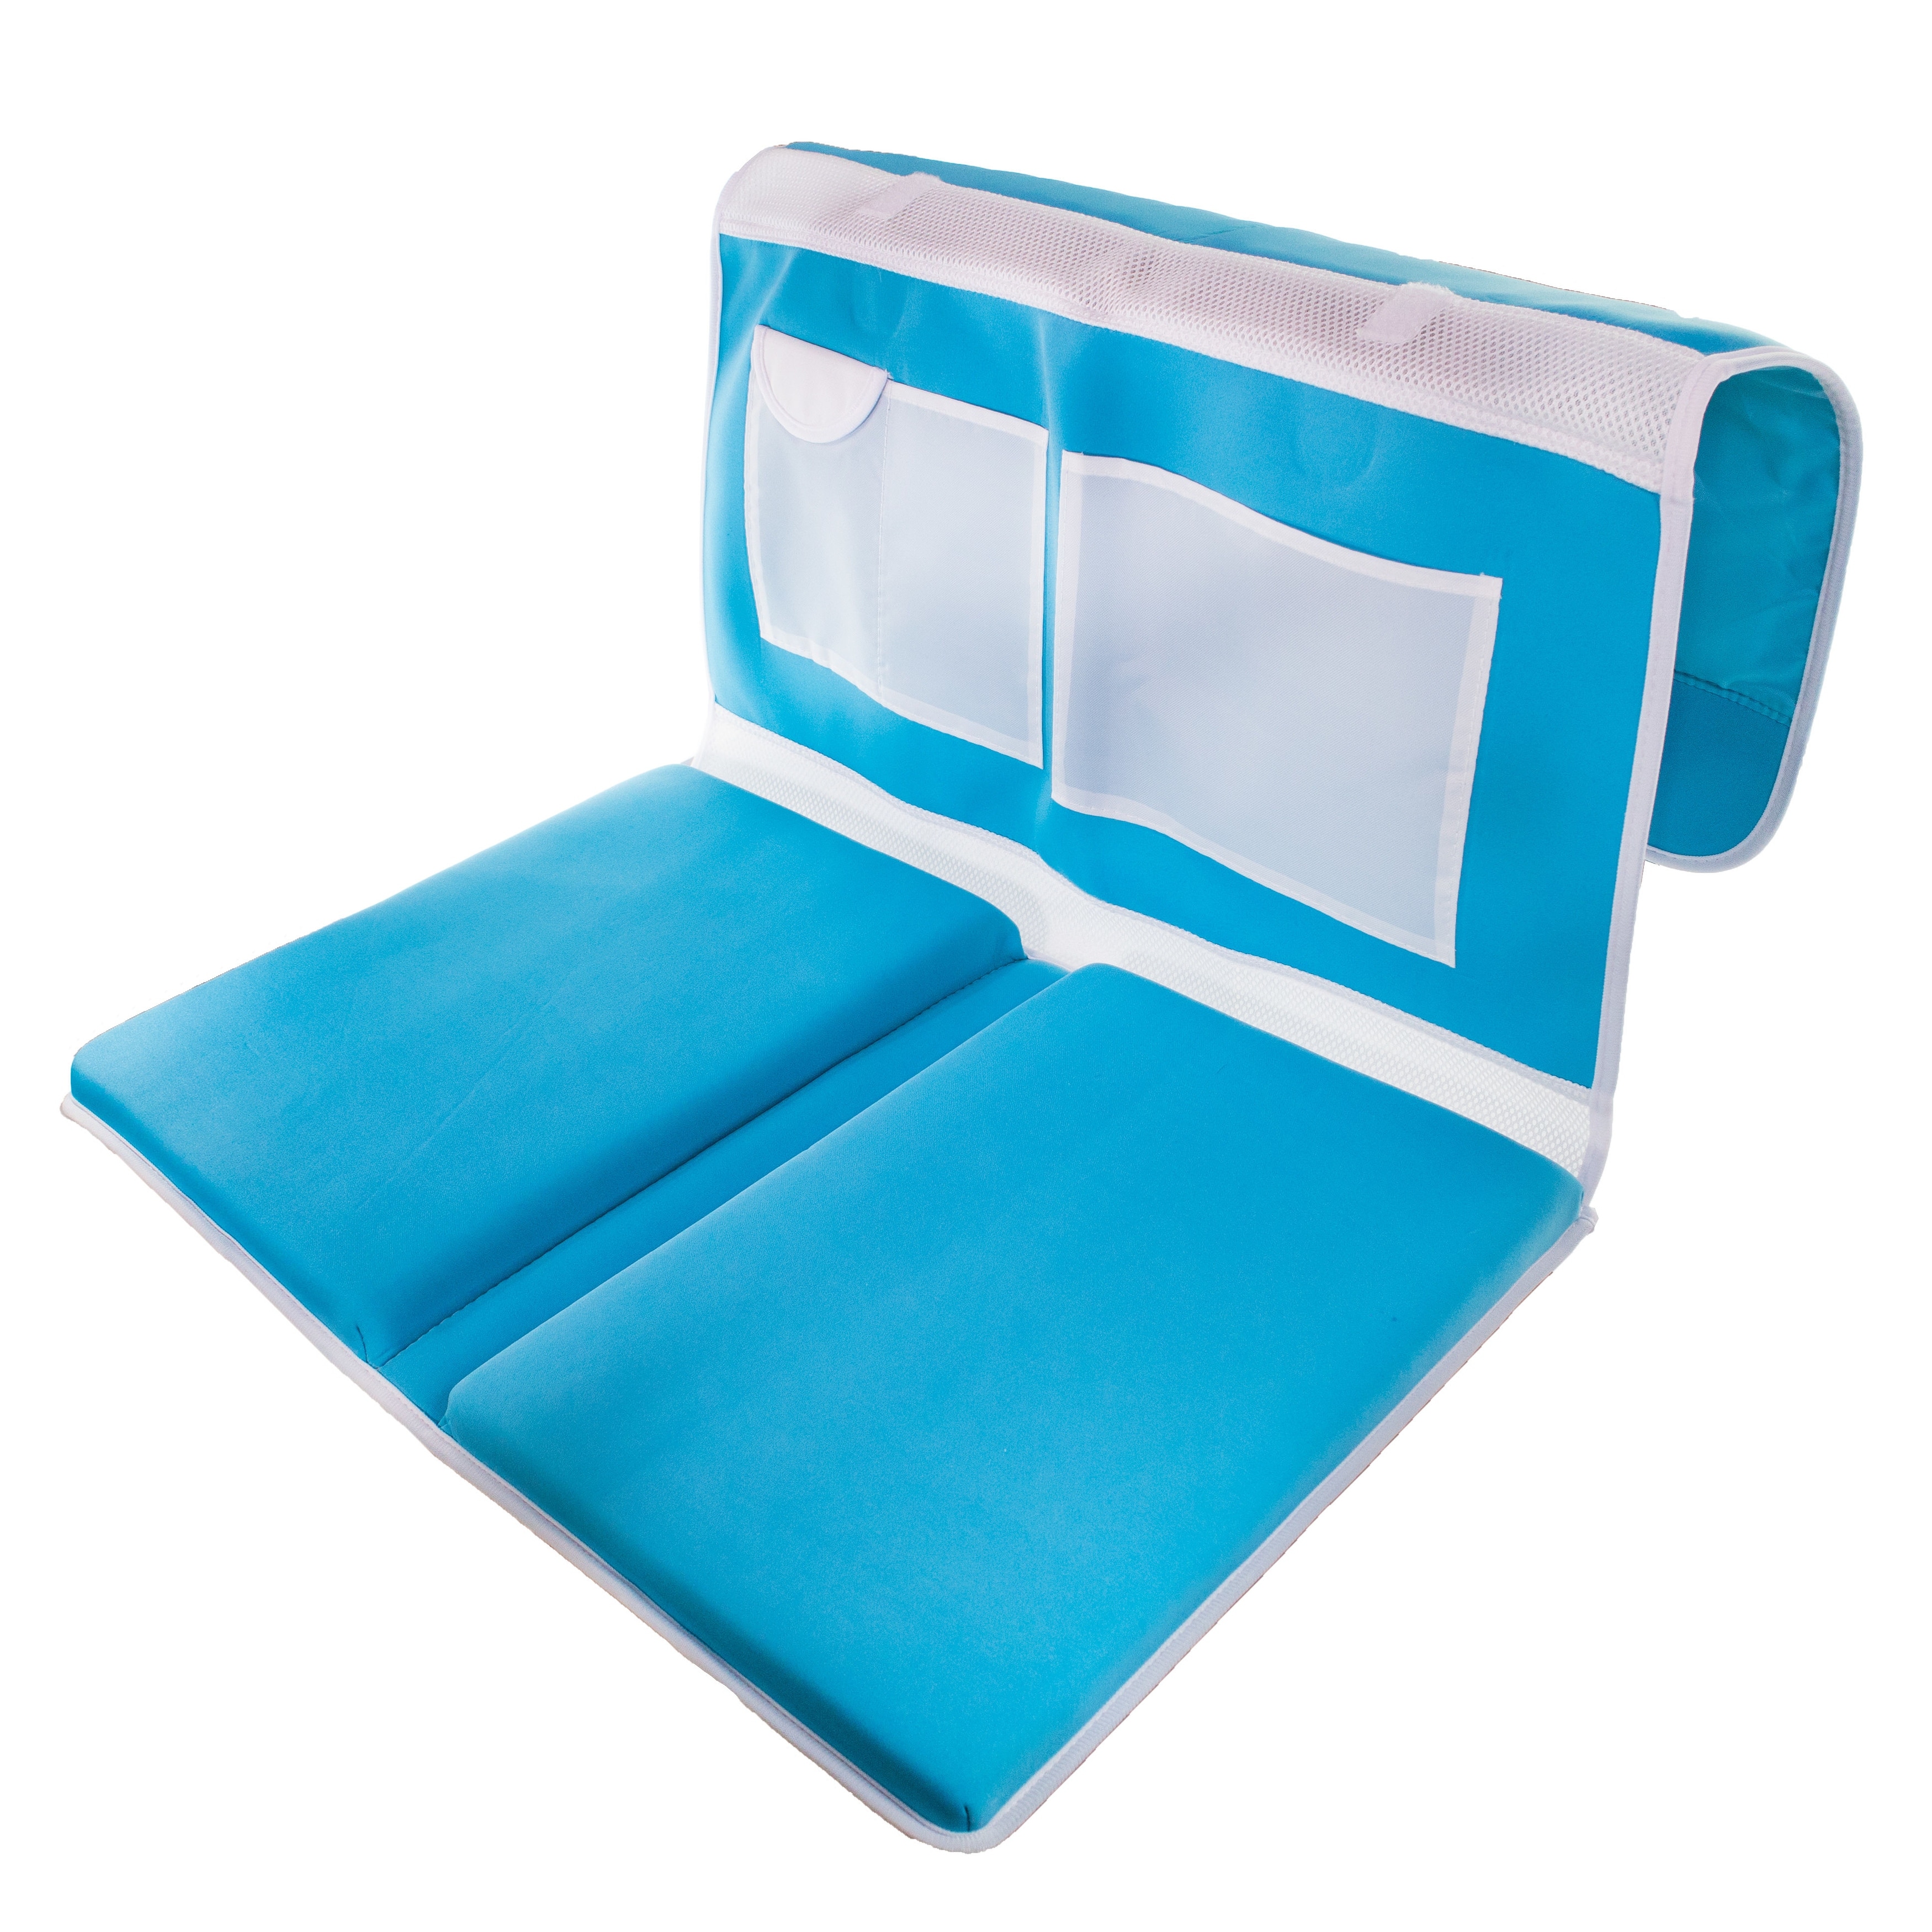 https://ak1.ostkcdn.com/images/products/is/images/direct/a0087be6df9fbb935309e85299746e8a6ddb0985/Bath-Kneeler-Pad-%26-Elbow-Armrest-Mat-Foldable-Non-Slip-Safety-Bathtube-Cushion.jpg